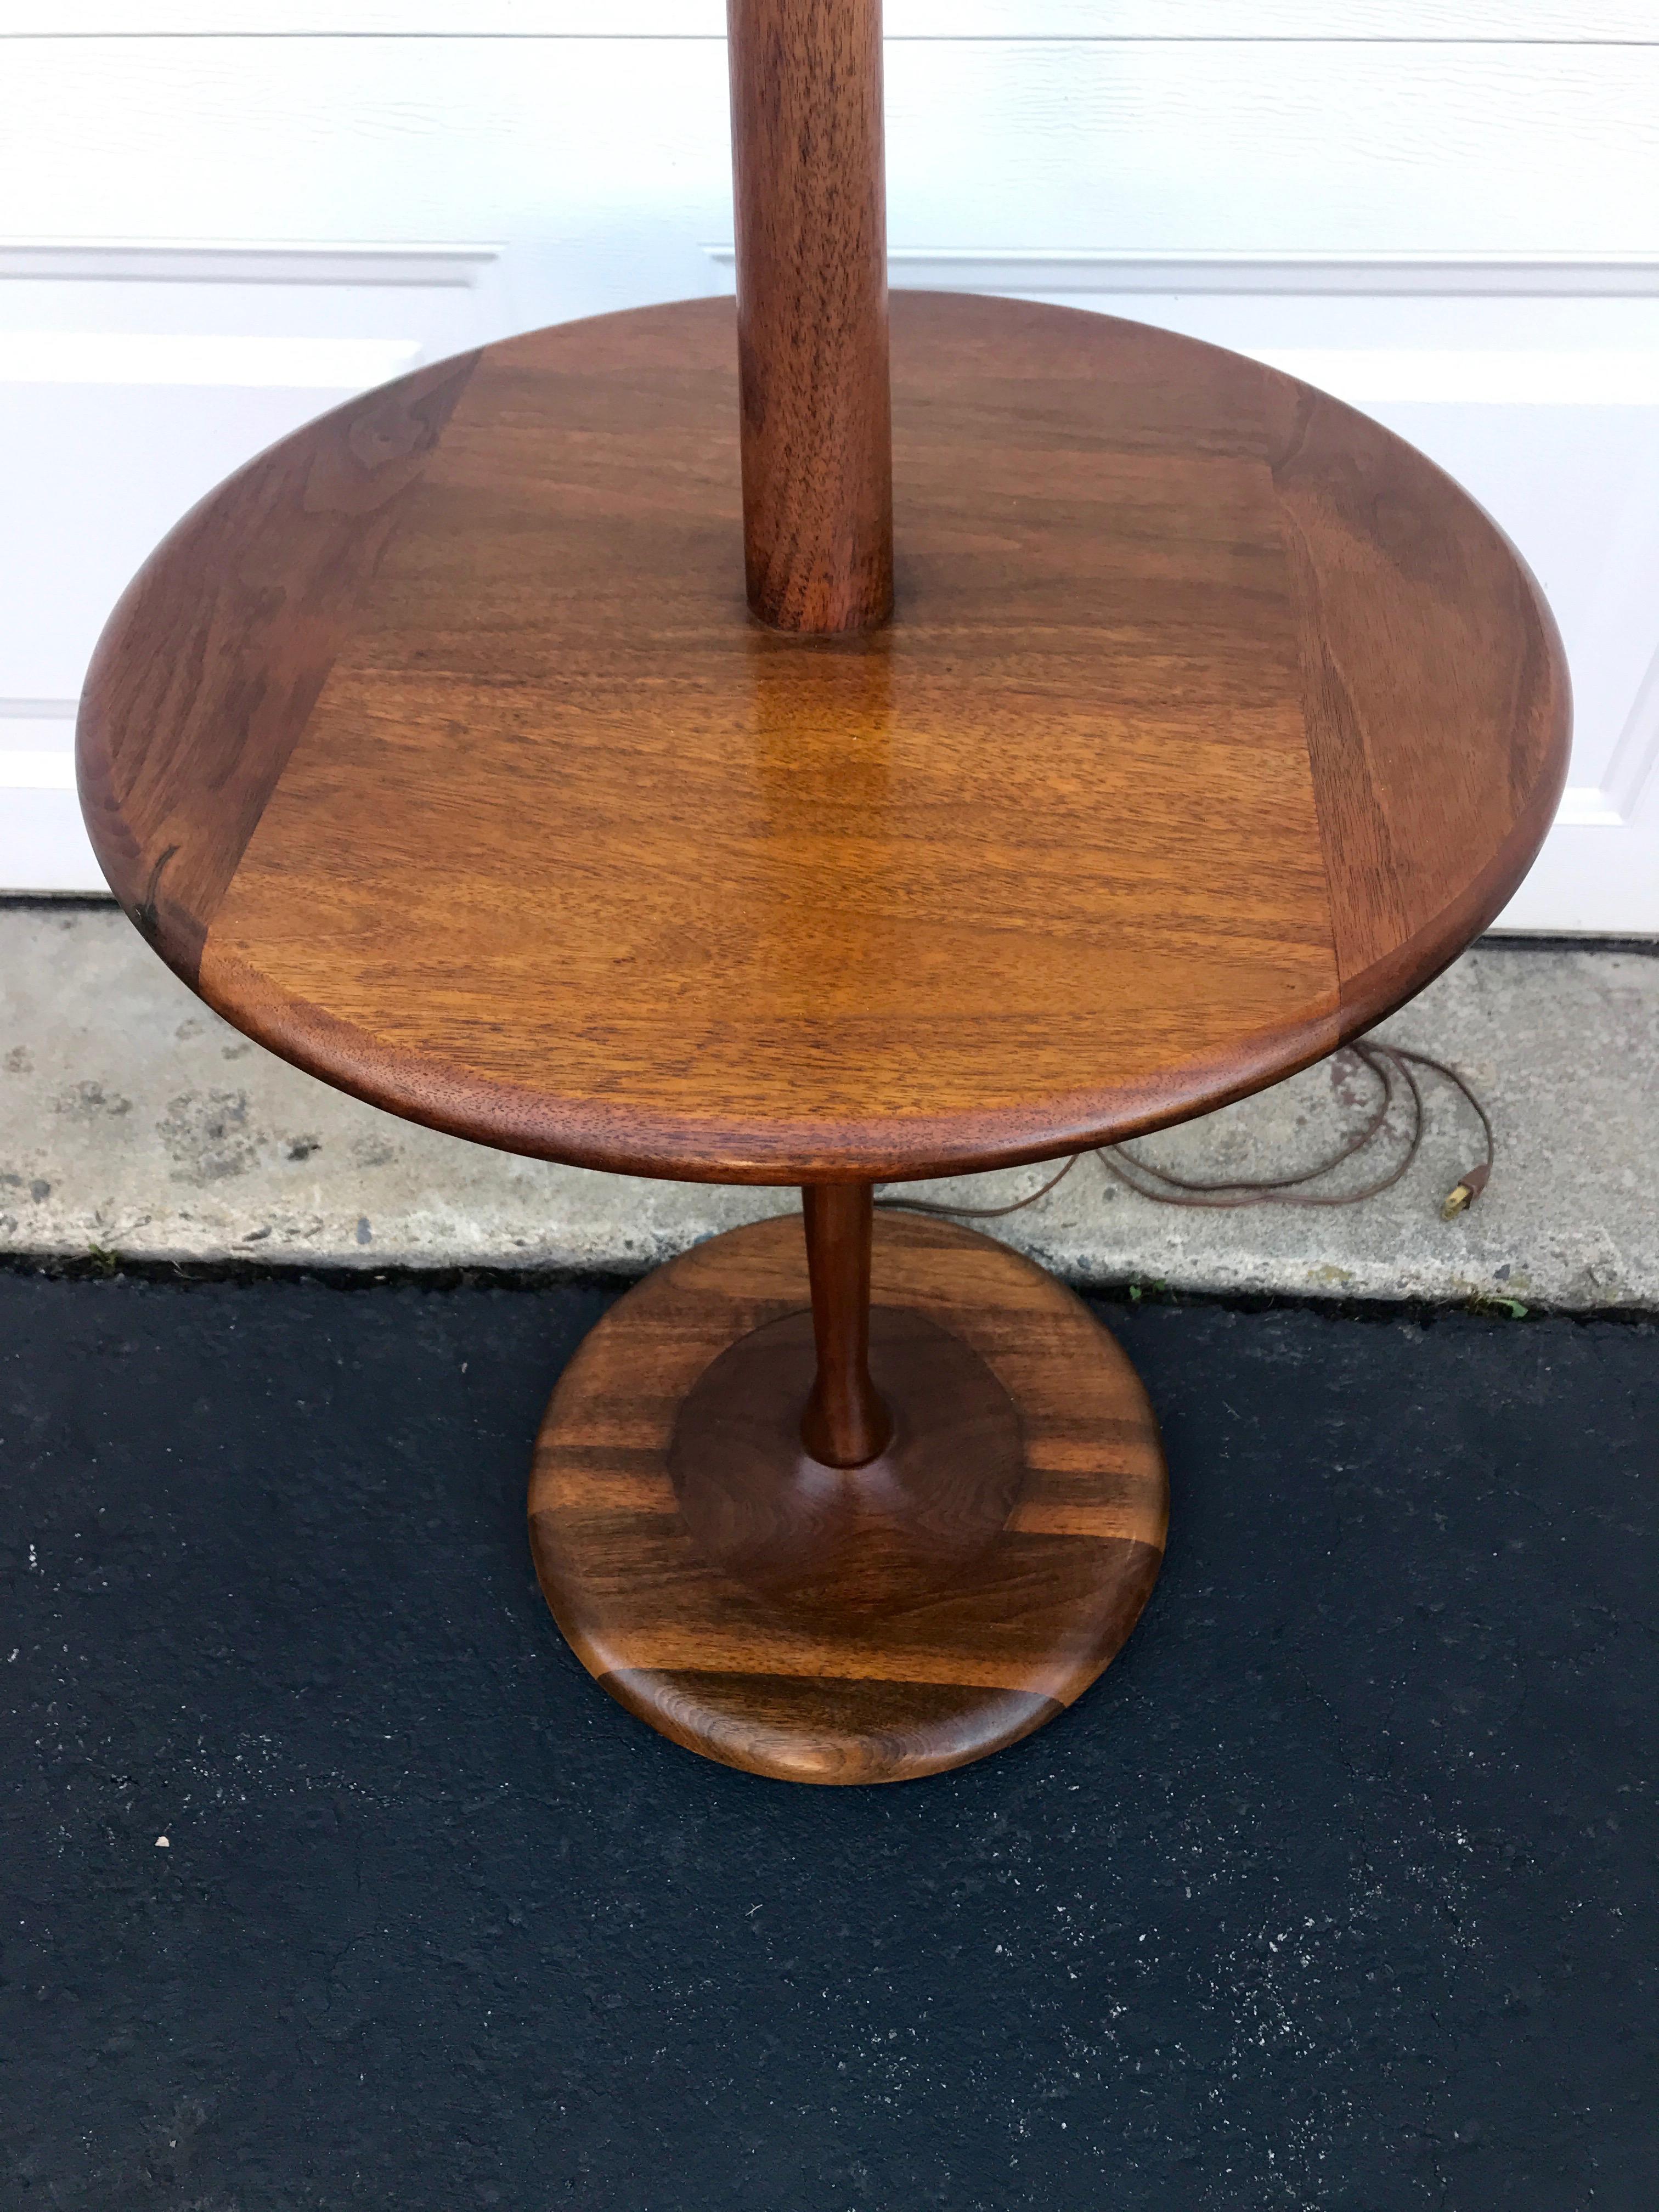 Turned Laurel Walnut Mid-Century Modern Floor Lamp with Table, circa 1960s For Sale